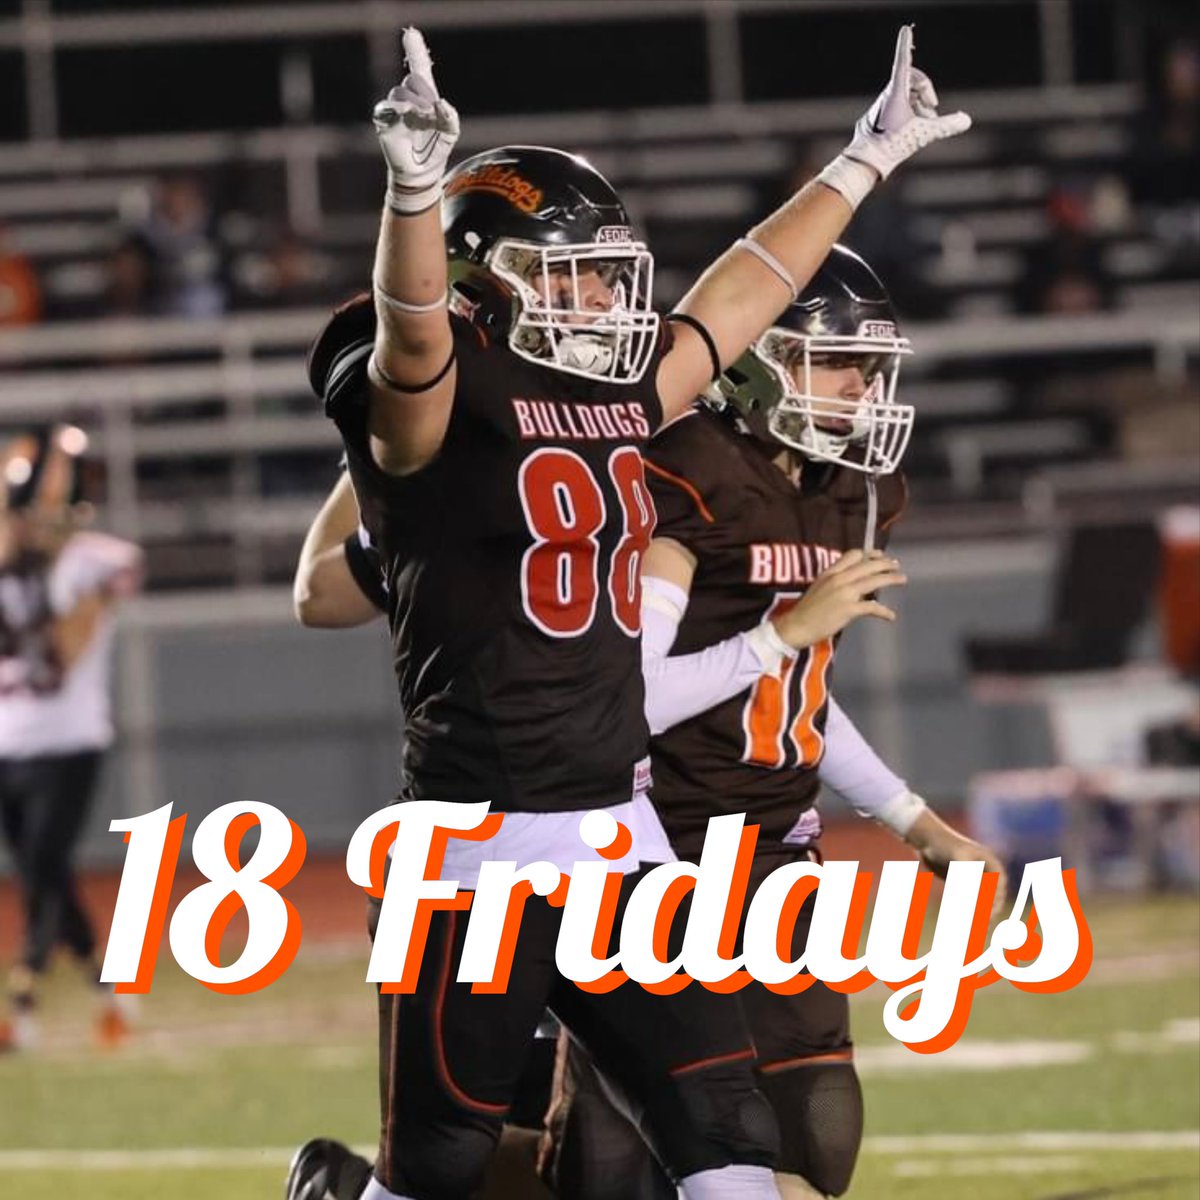 18 weeks til we start scoring those touchdowns!! Will you be in the stands with us? #TheFinalCountdown #TheseDogsAreDifferent #AllTheWayUp #bigdogenergy #BulldogFootball #fridayvibes